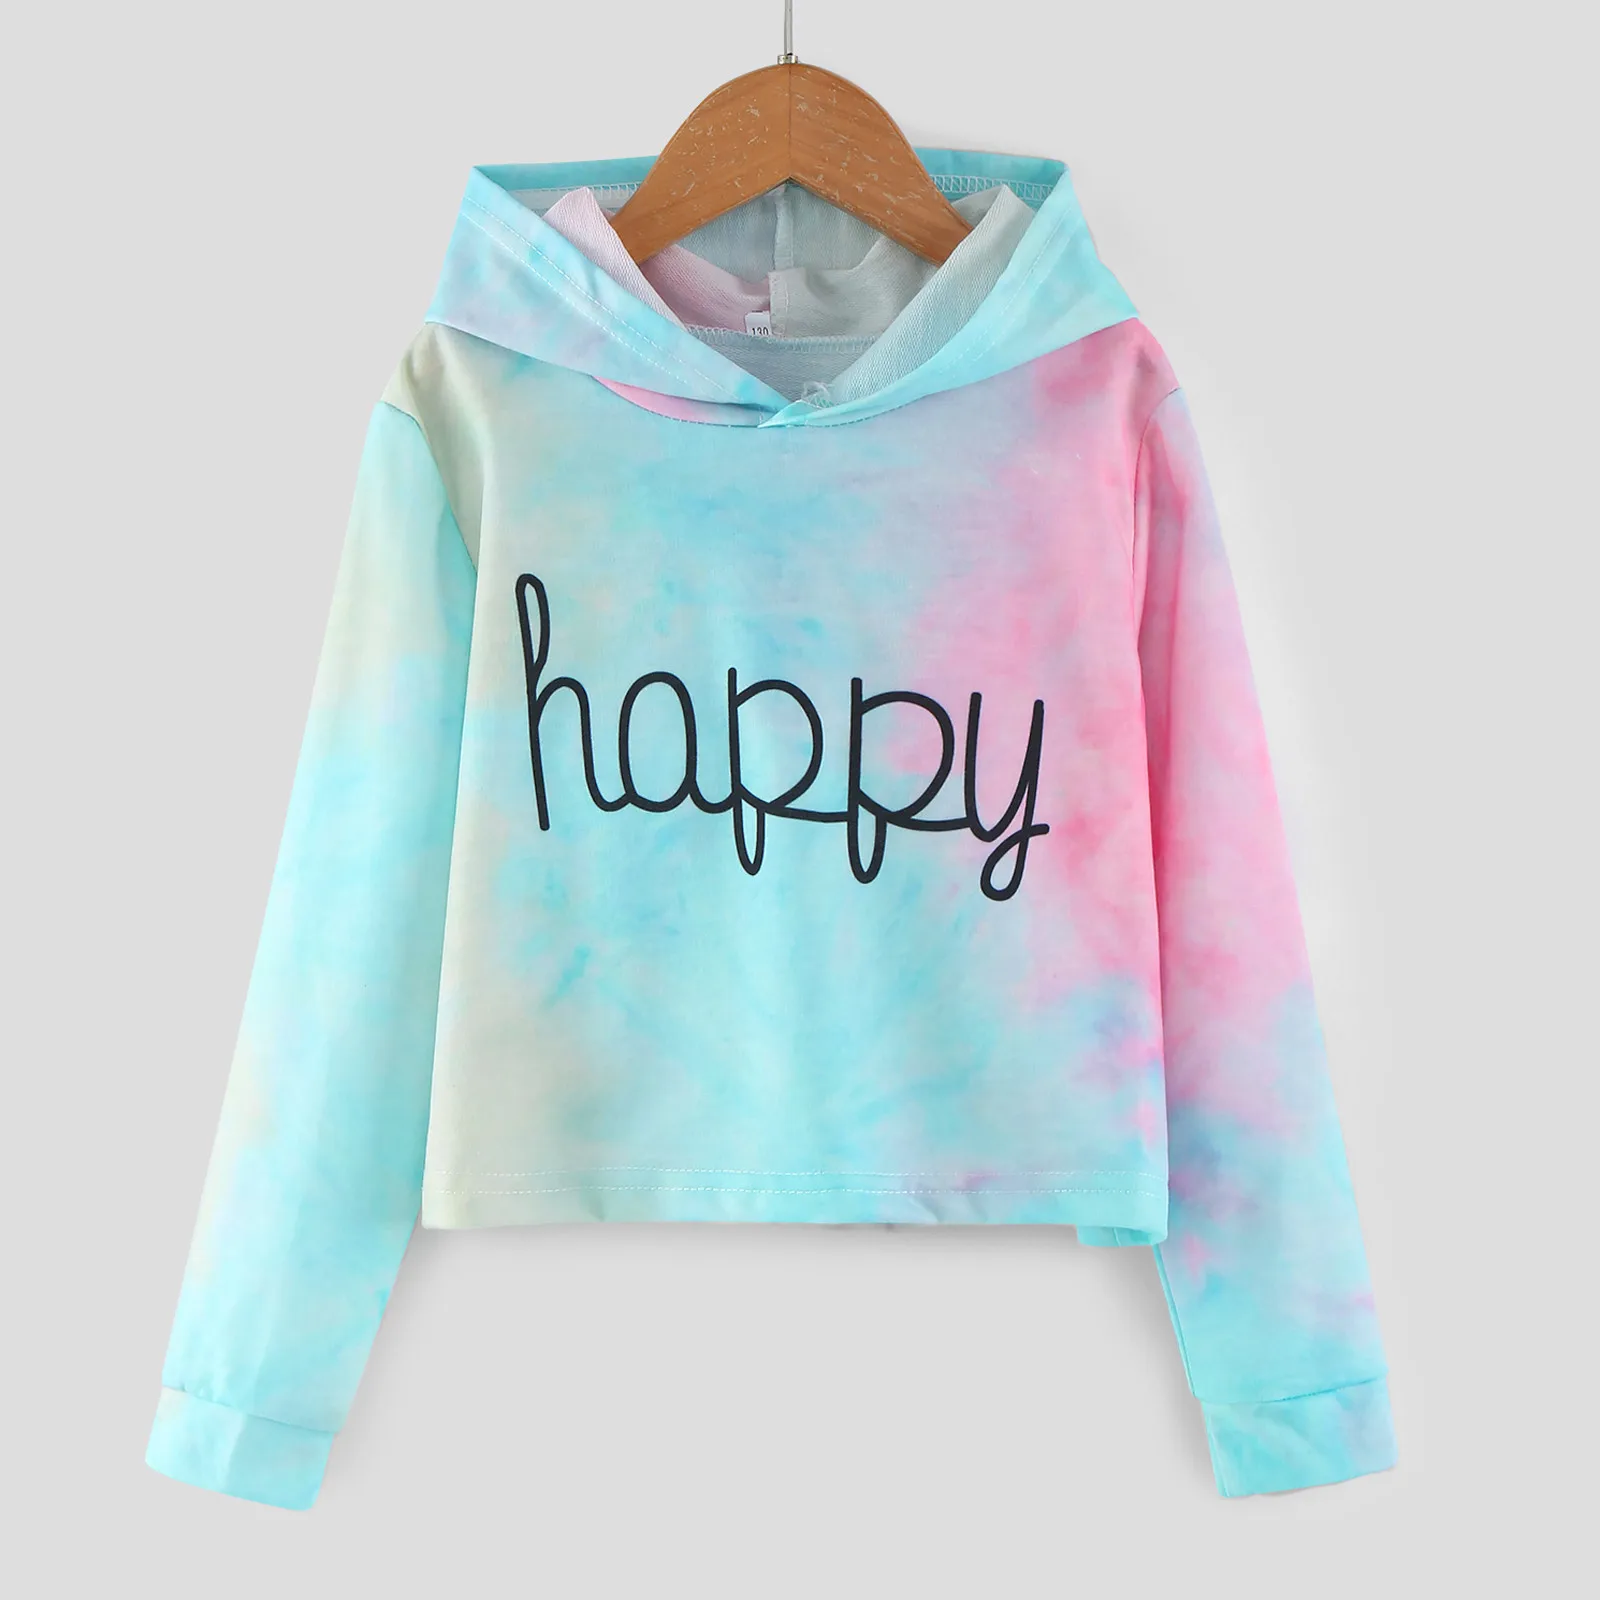 

Kids Clothes Boys Letter Tie Long Kids Clothes Girls Pullover Tops Sweatshirts Hoodies Teen Short Dyed Sleeve Girls Tops